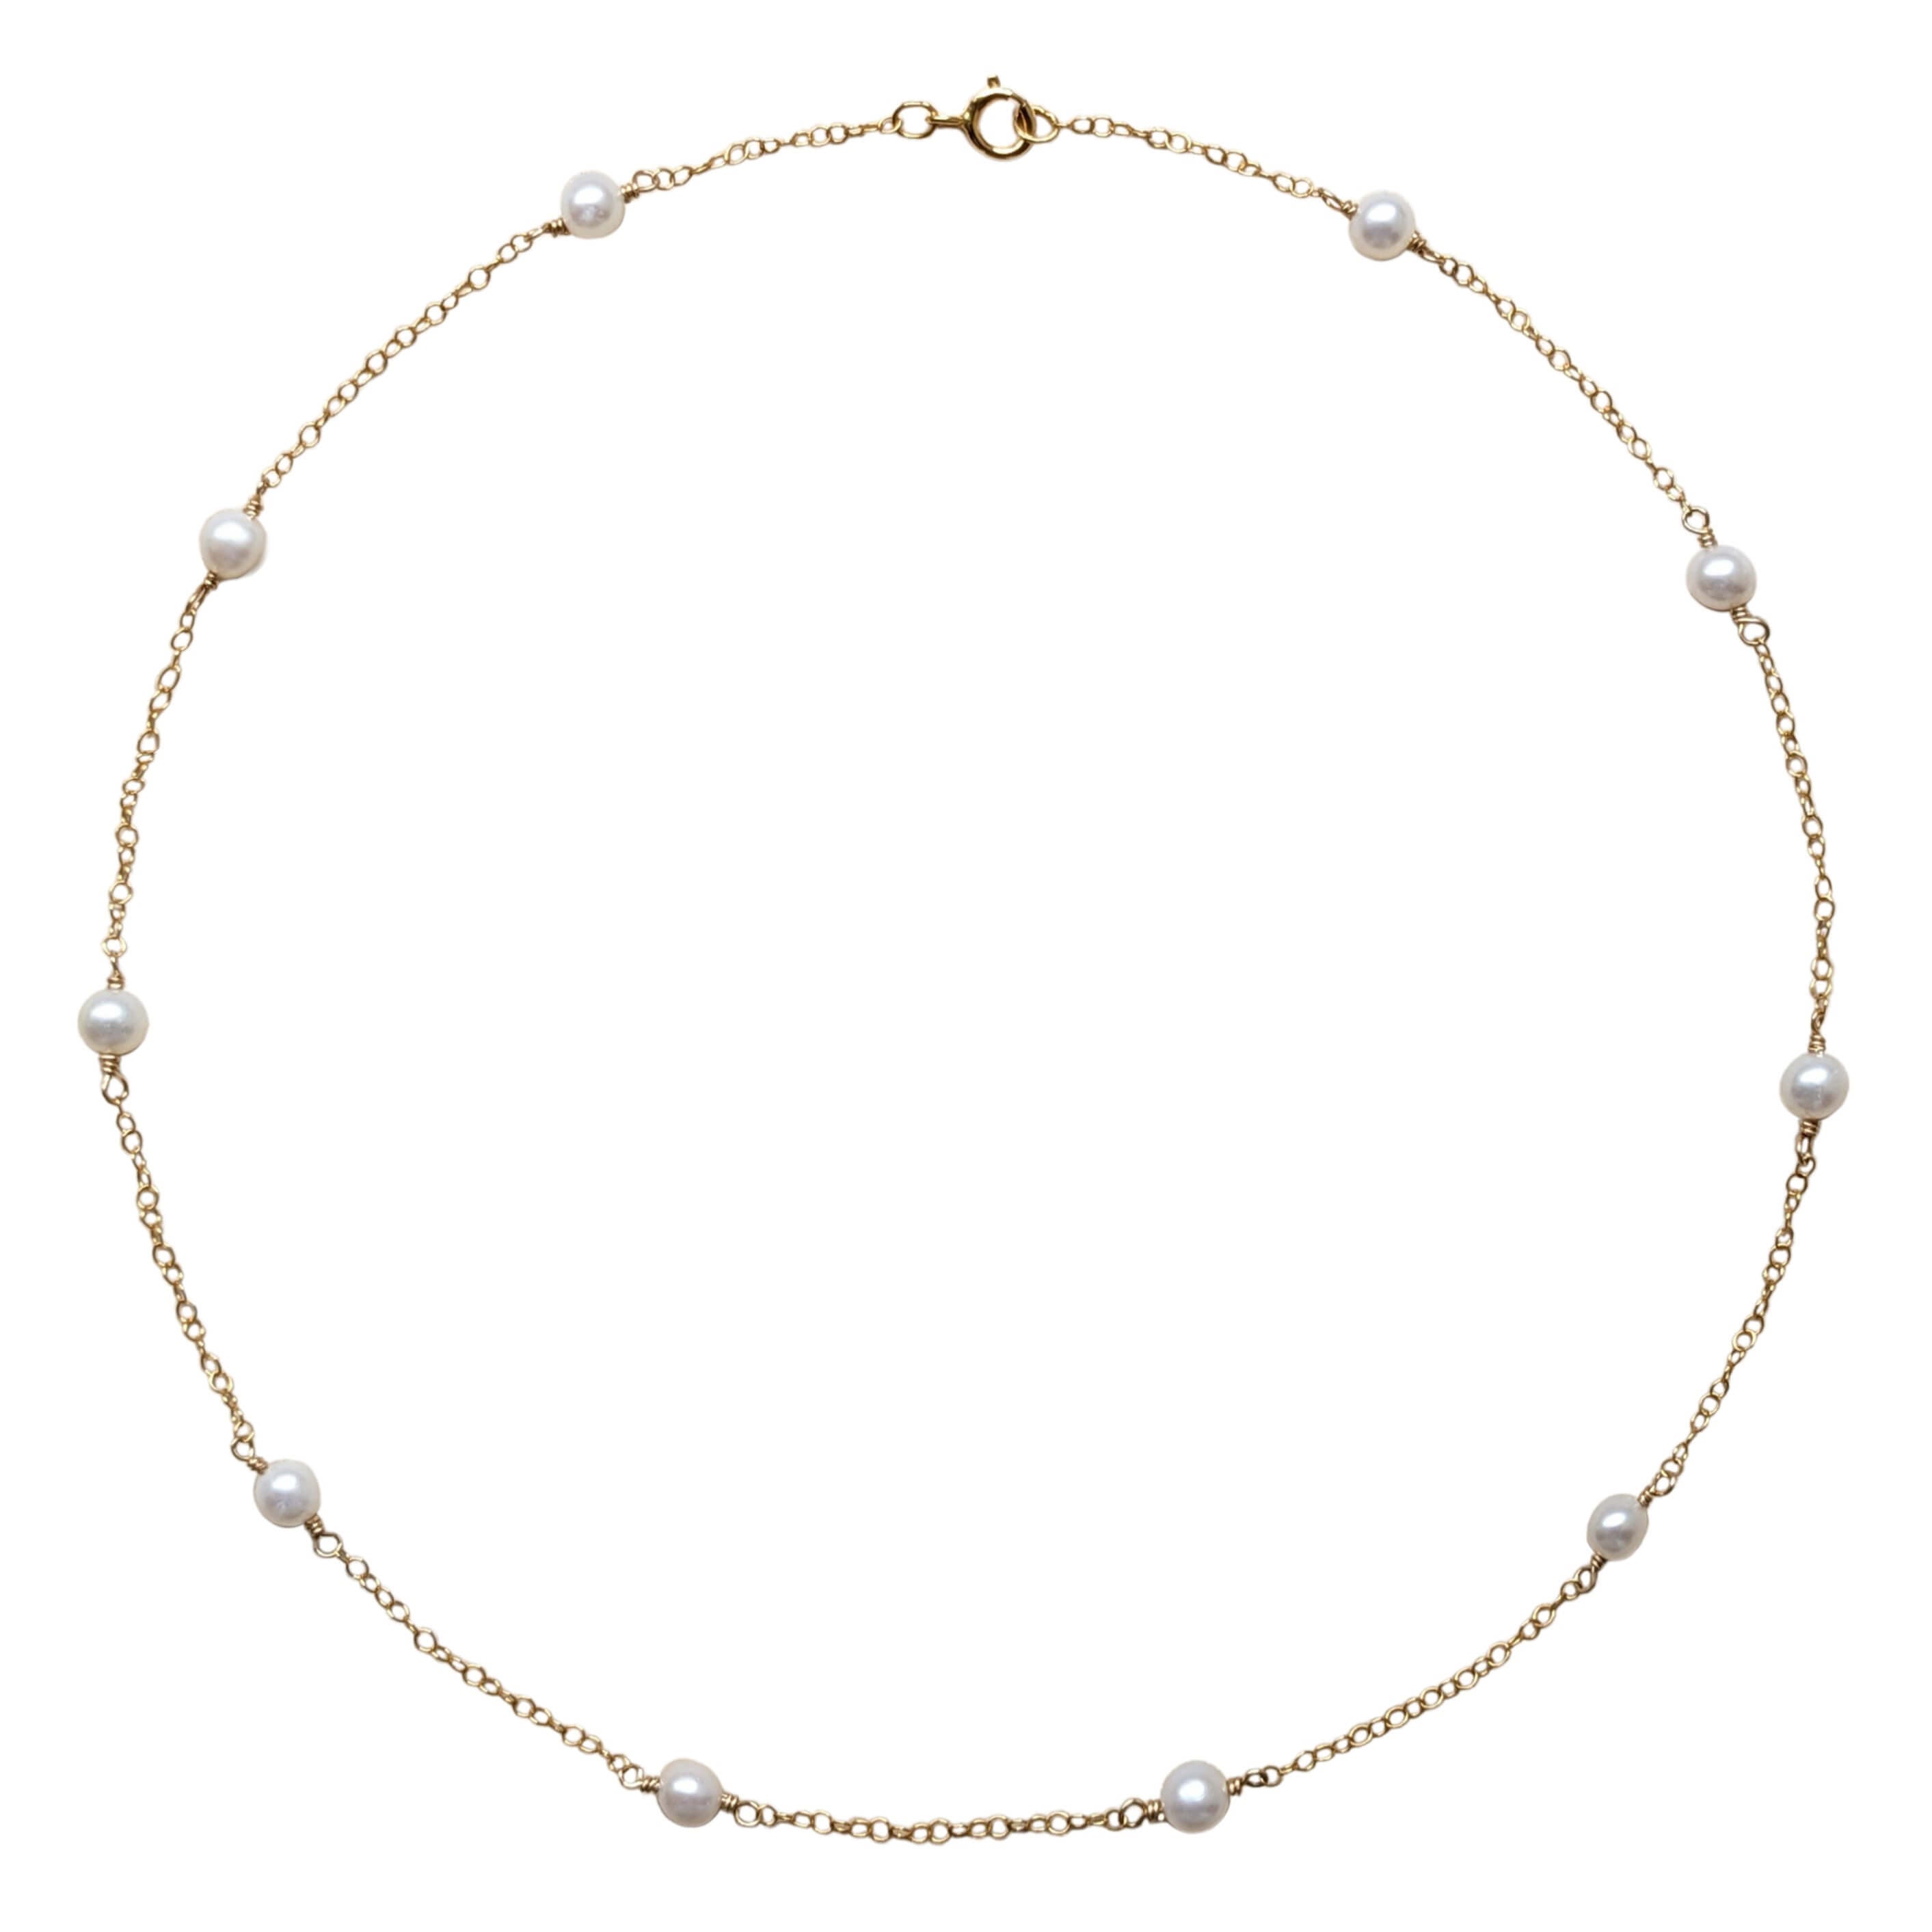 pearl and gold filled chain necklace on a white background